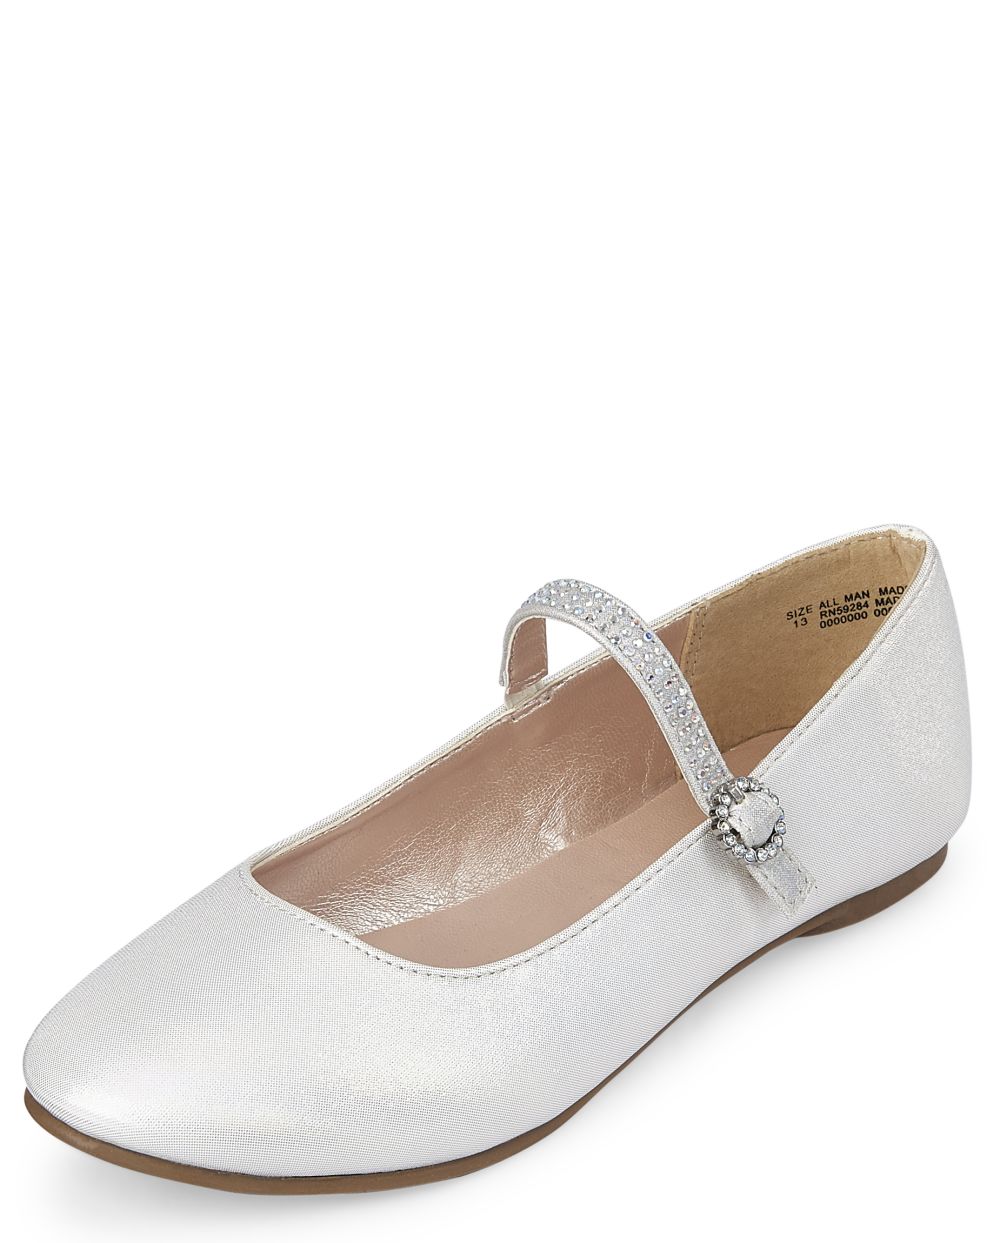 Girls Jeweled Iridescent Faux Leather Ballet Flats